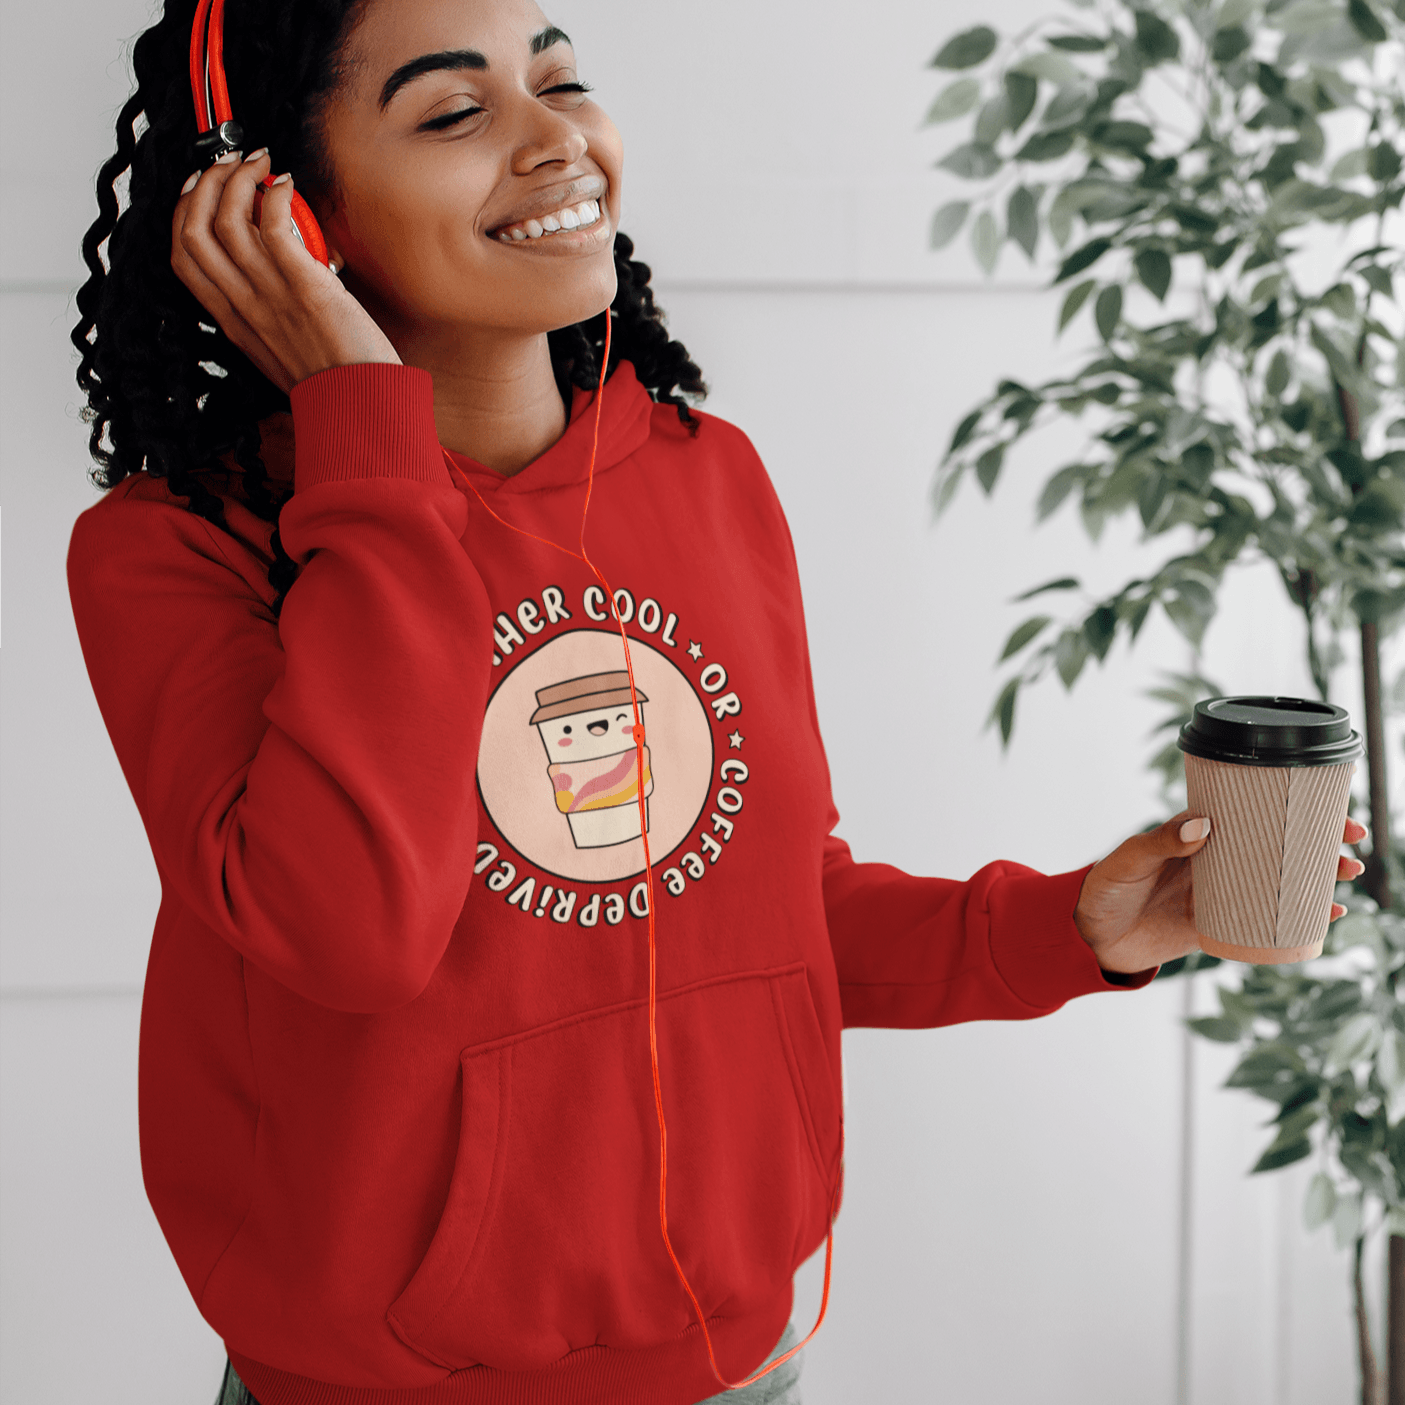 Either Cool or Coffee Deprived Hoodies - Unisex - Cute Stuff India